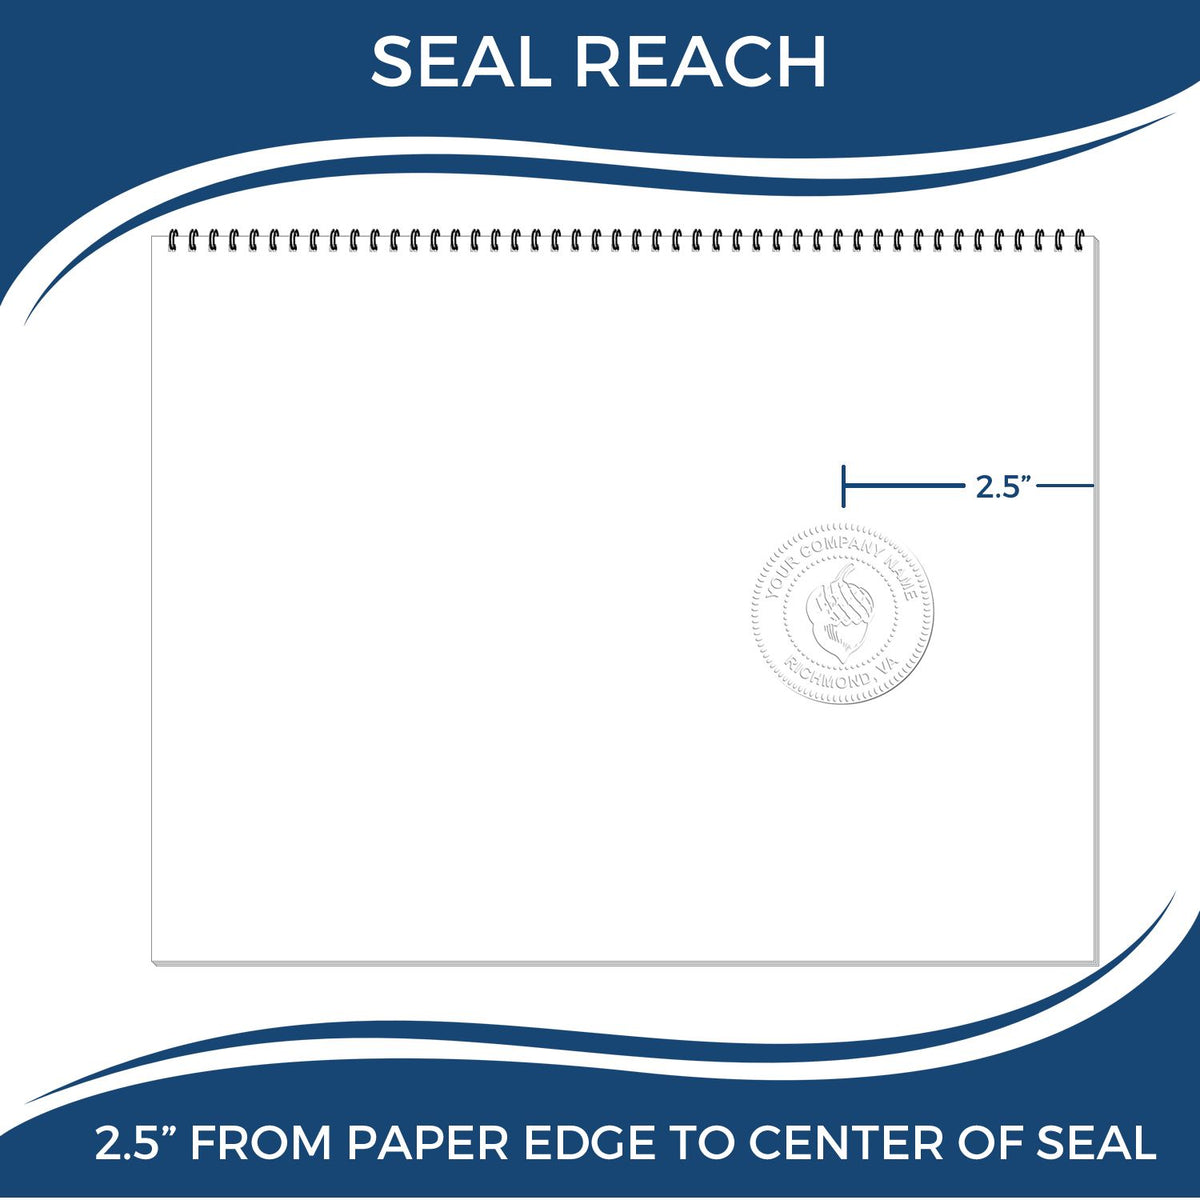 An infographic showing the seal reach which is represented by a ruler and a miniature seal image of the Long Reach Tennessee Geology Seal